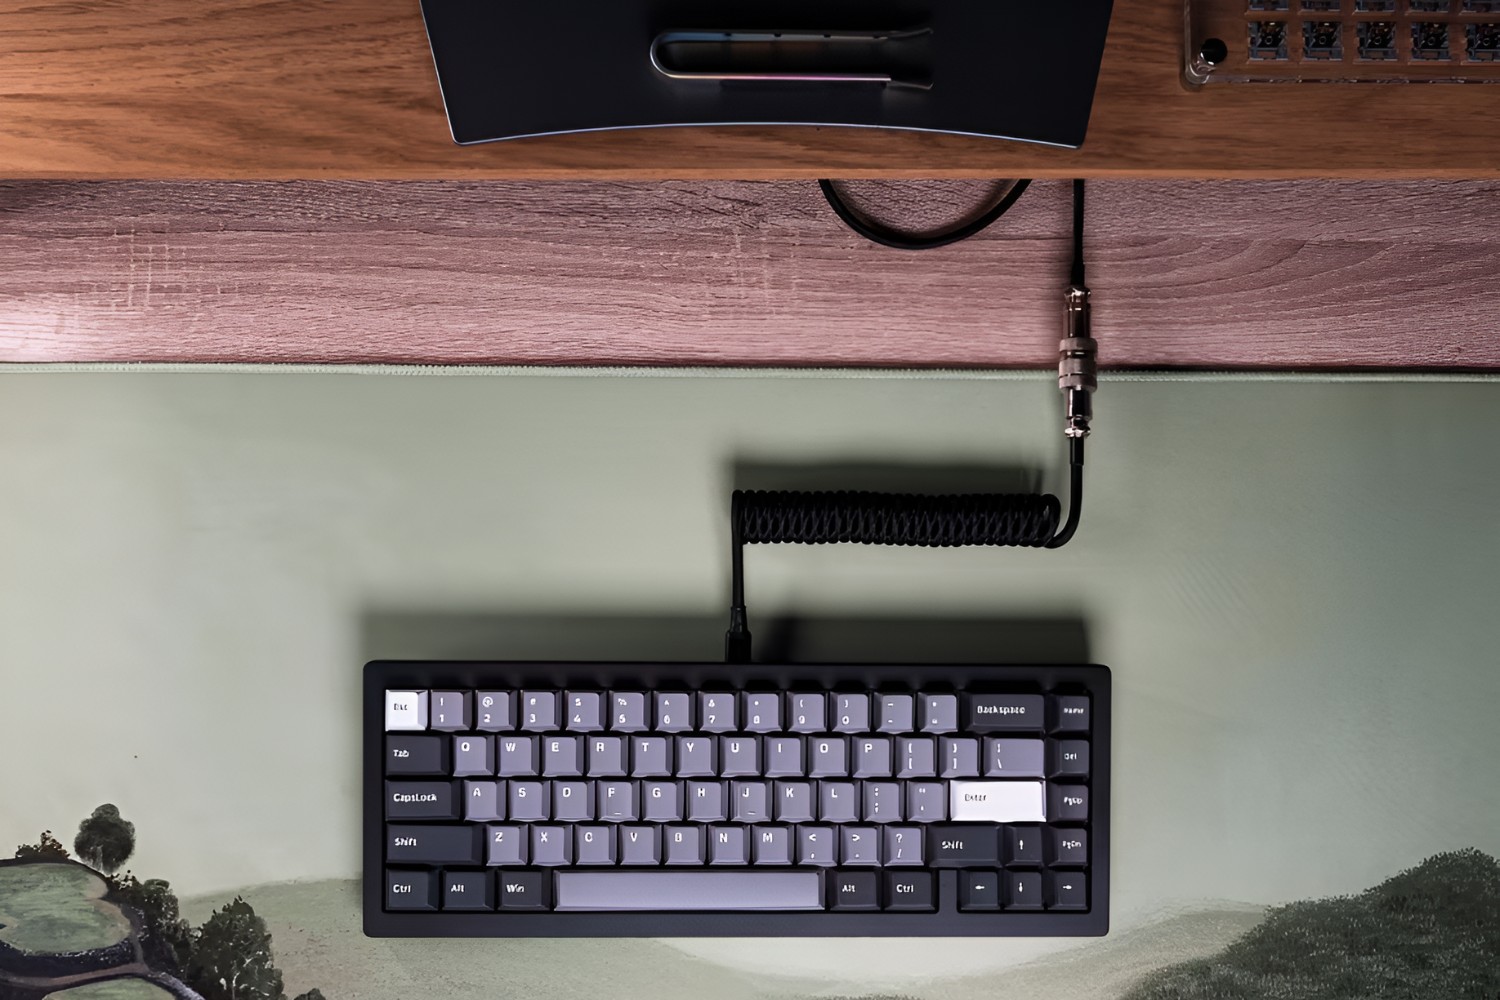 How To Coil A Cable On A Mechanical Keyboard